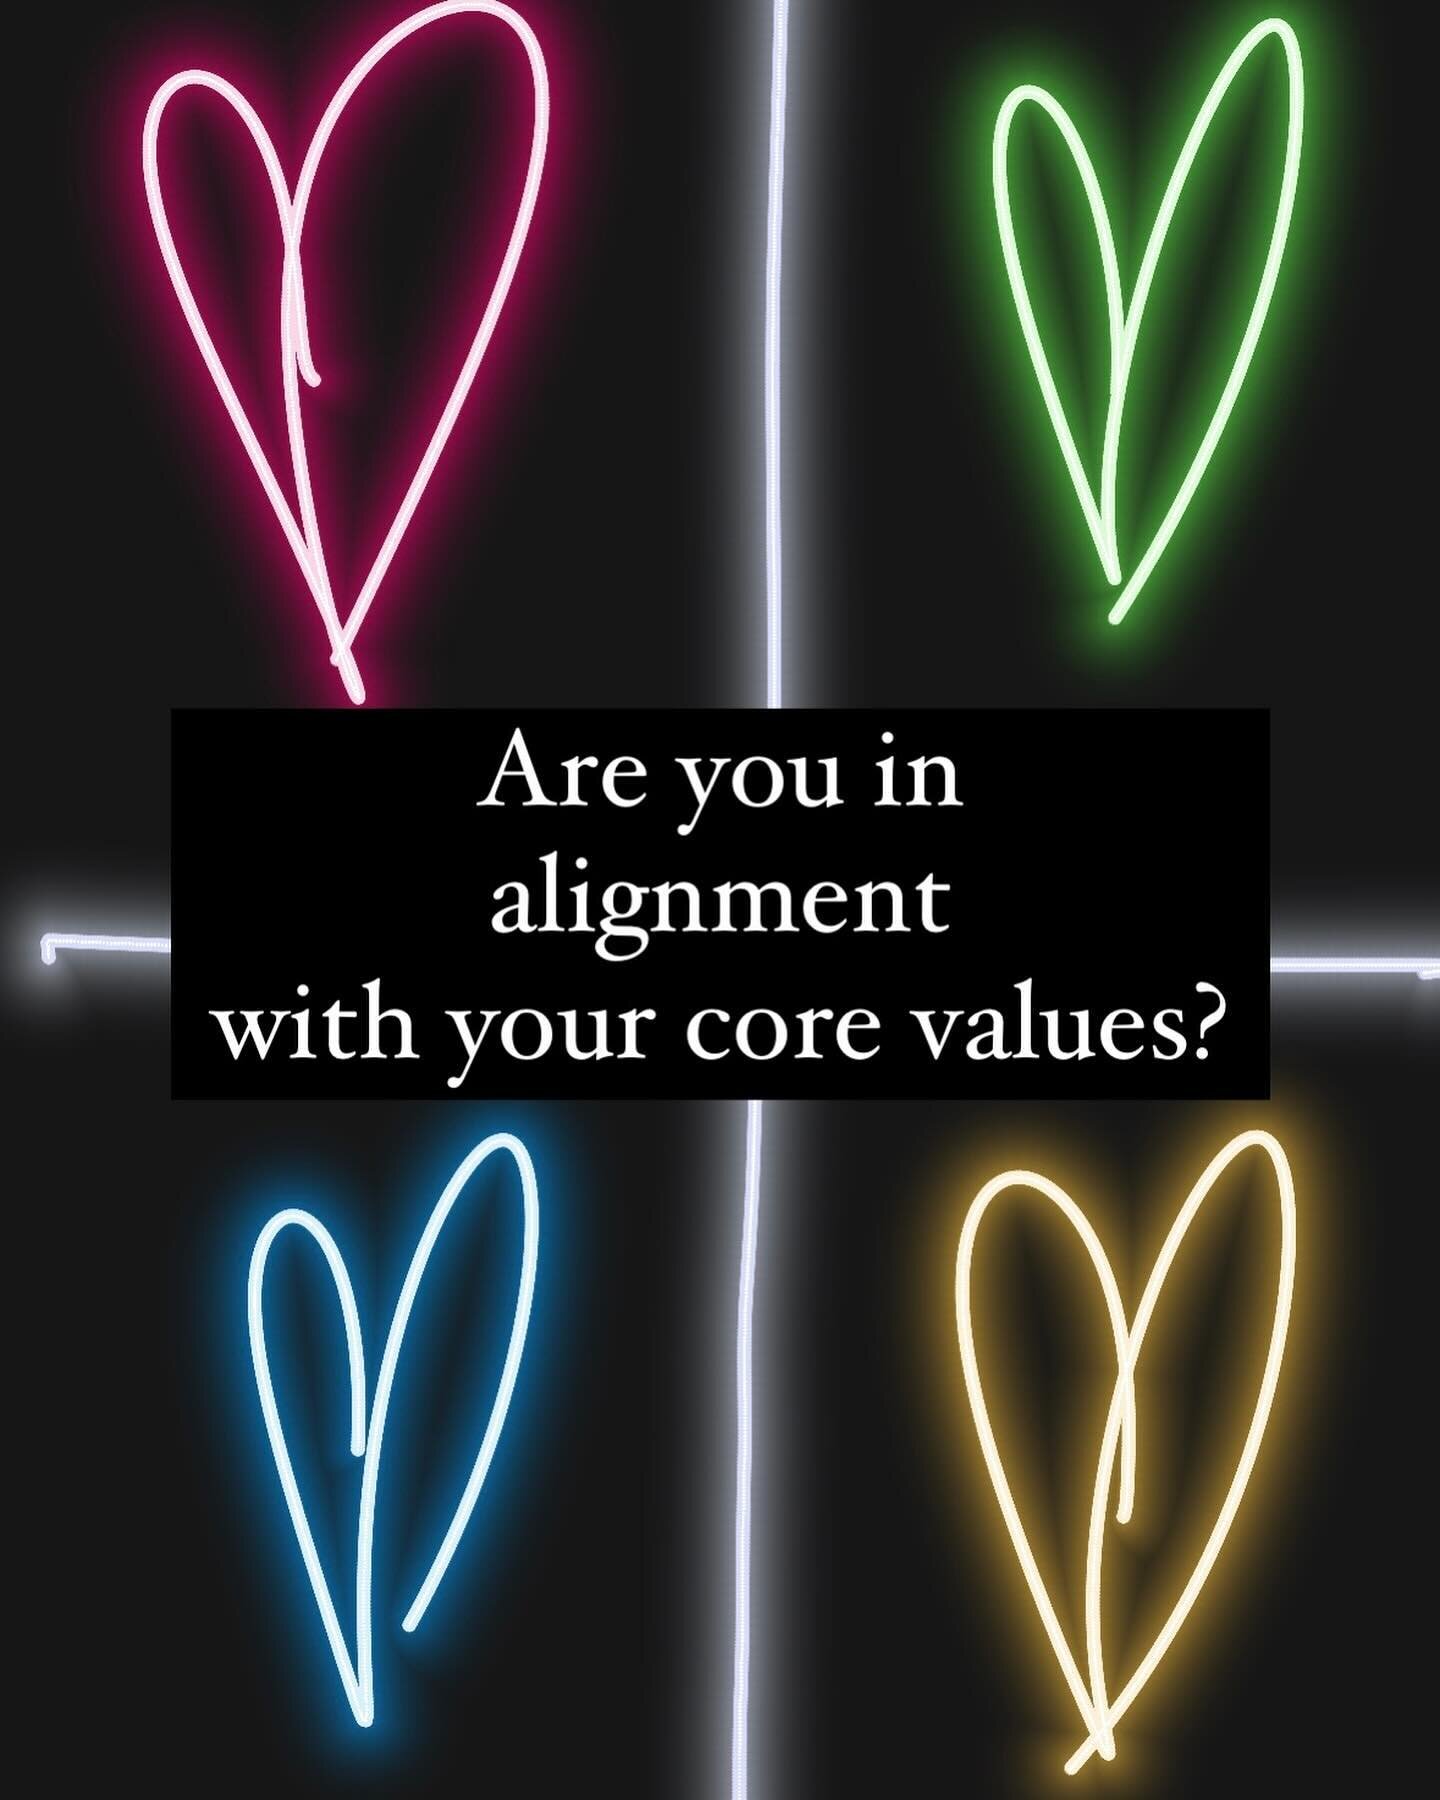 Our thoughts and actions need to be consistent with our values for us to be in alignment with our highest potential.

Many of us ignore when we aren&rsquo;t acting in accordance with our core values because we are unconscious. When we raise awareness